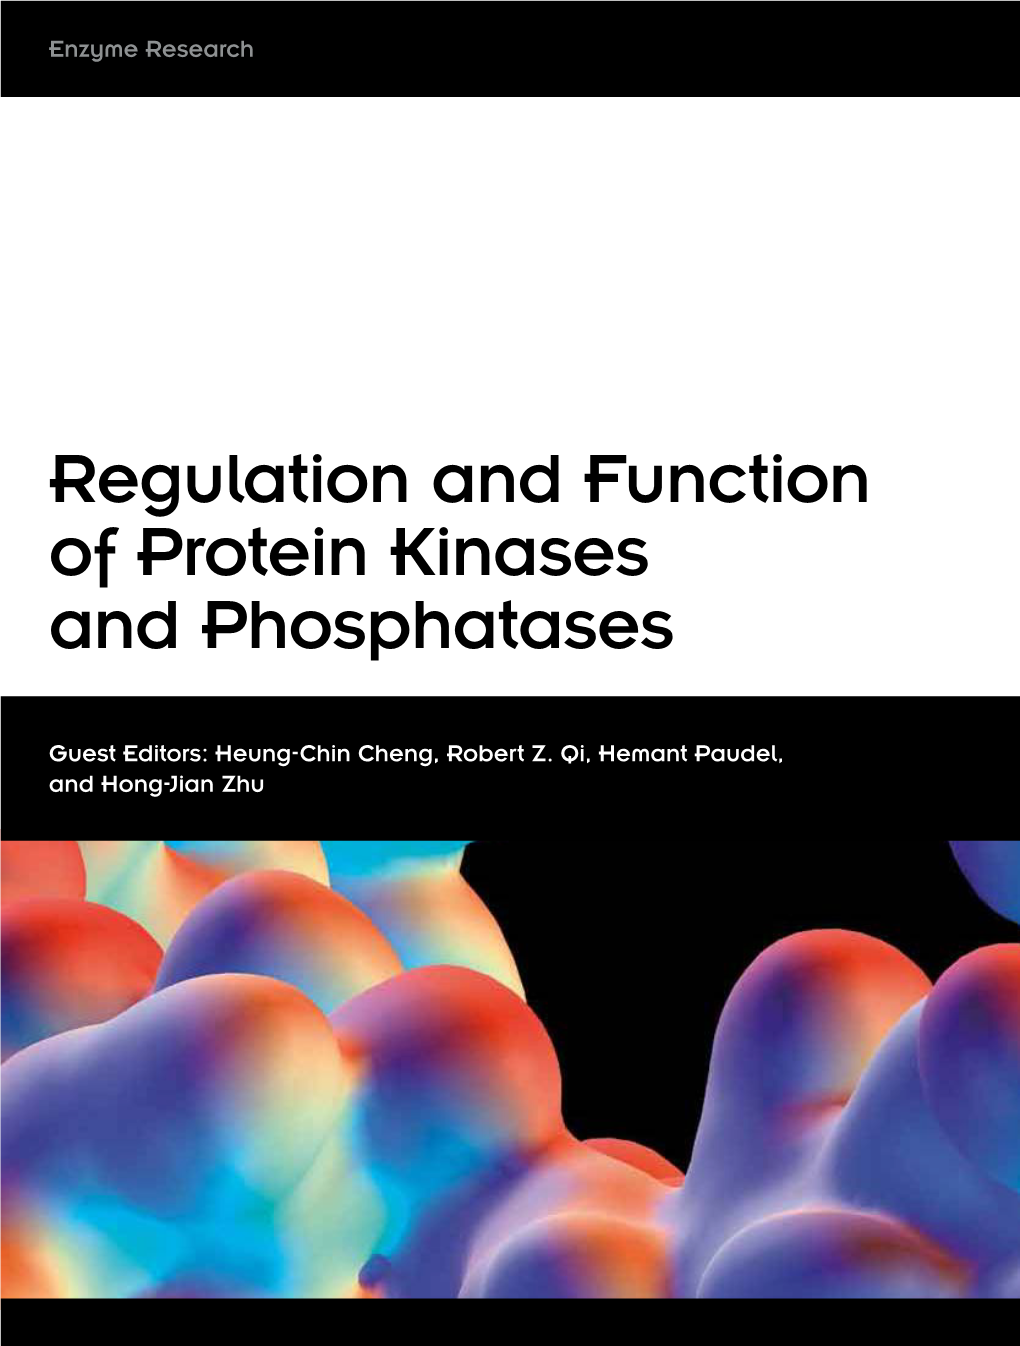 Regulation and Function of Protein Kinases and Phosphatases